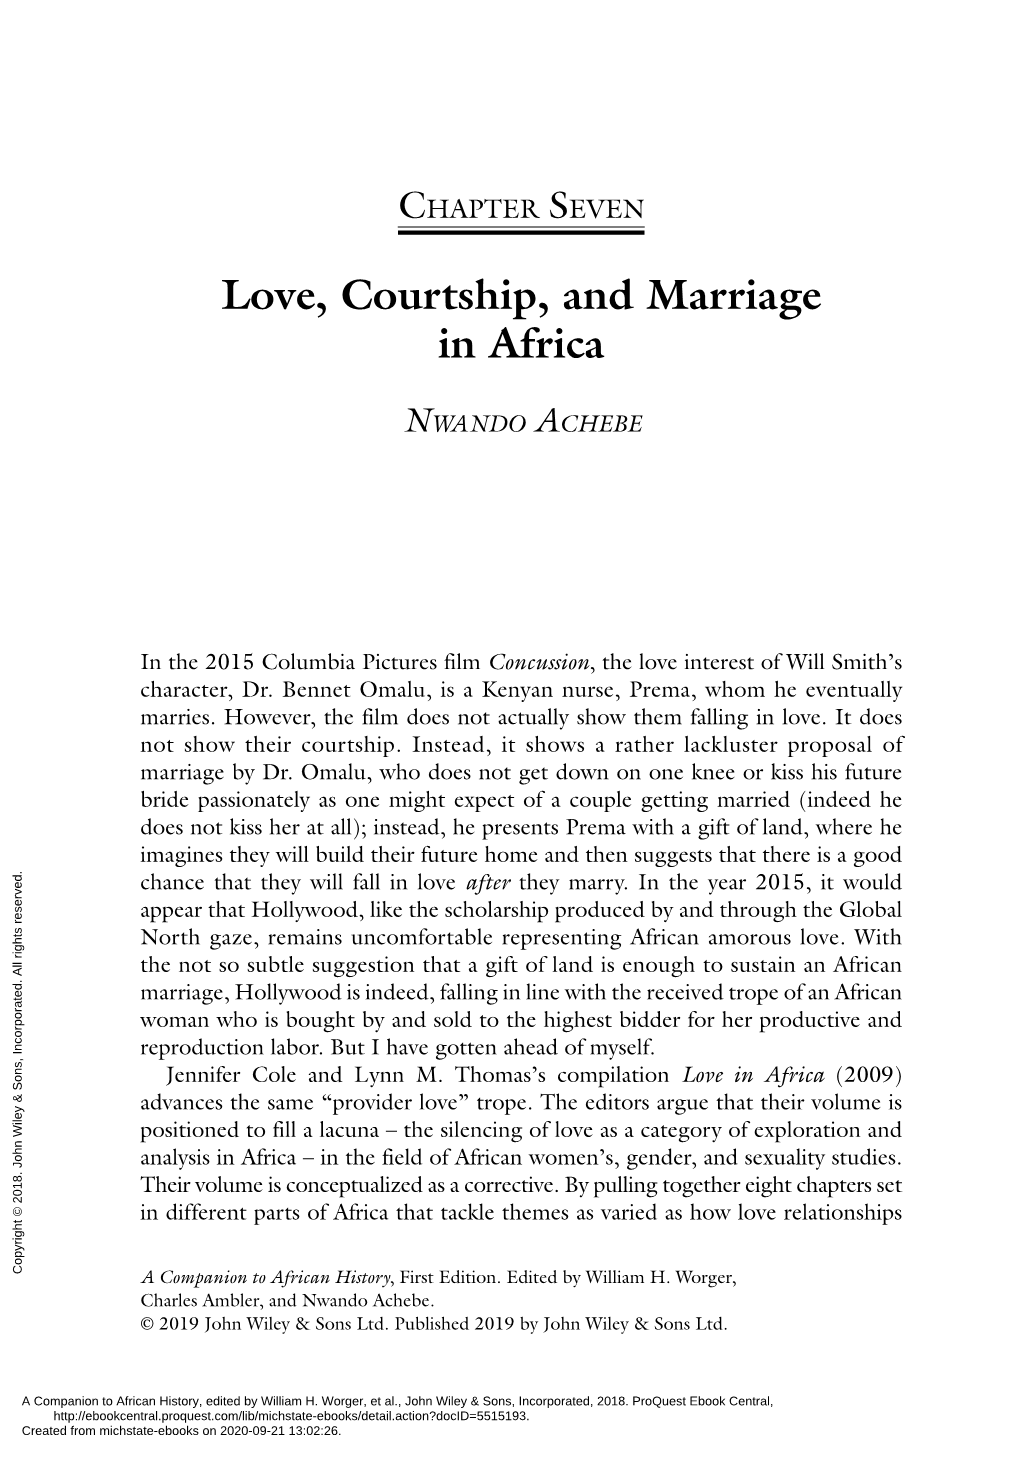 Love, Courtship, and Marriage in Africa